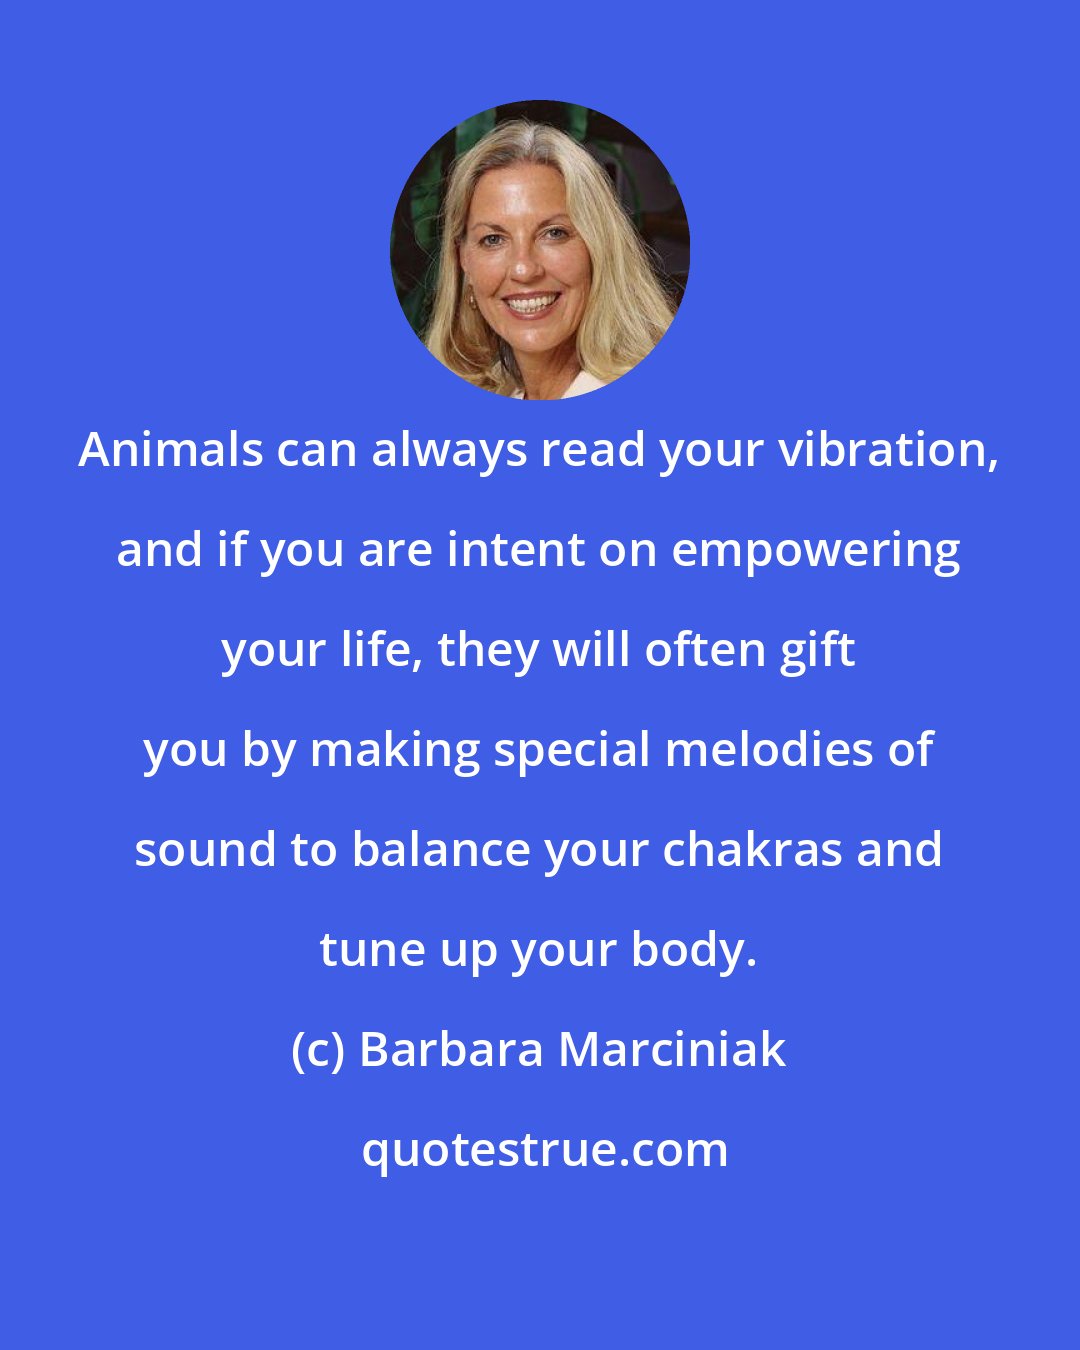 Barbara Marciniak: Animals can always read your vibration, and if you are intent on empowering your life, they will often gift you by making special melodies of sound to balance your chakras and tune up your body.